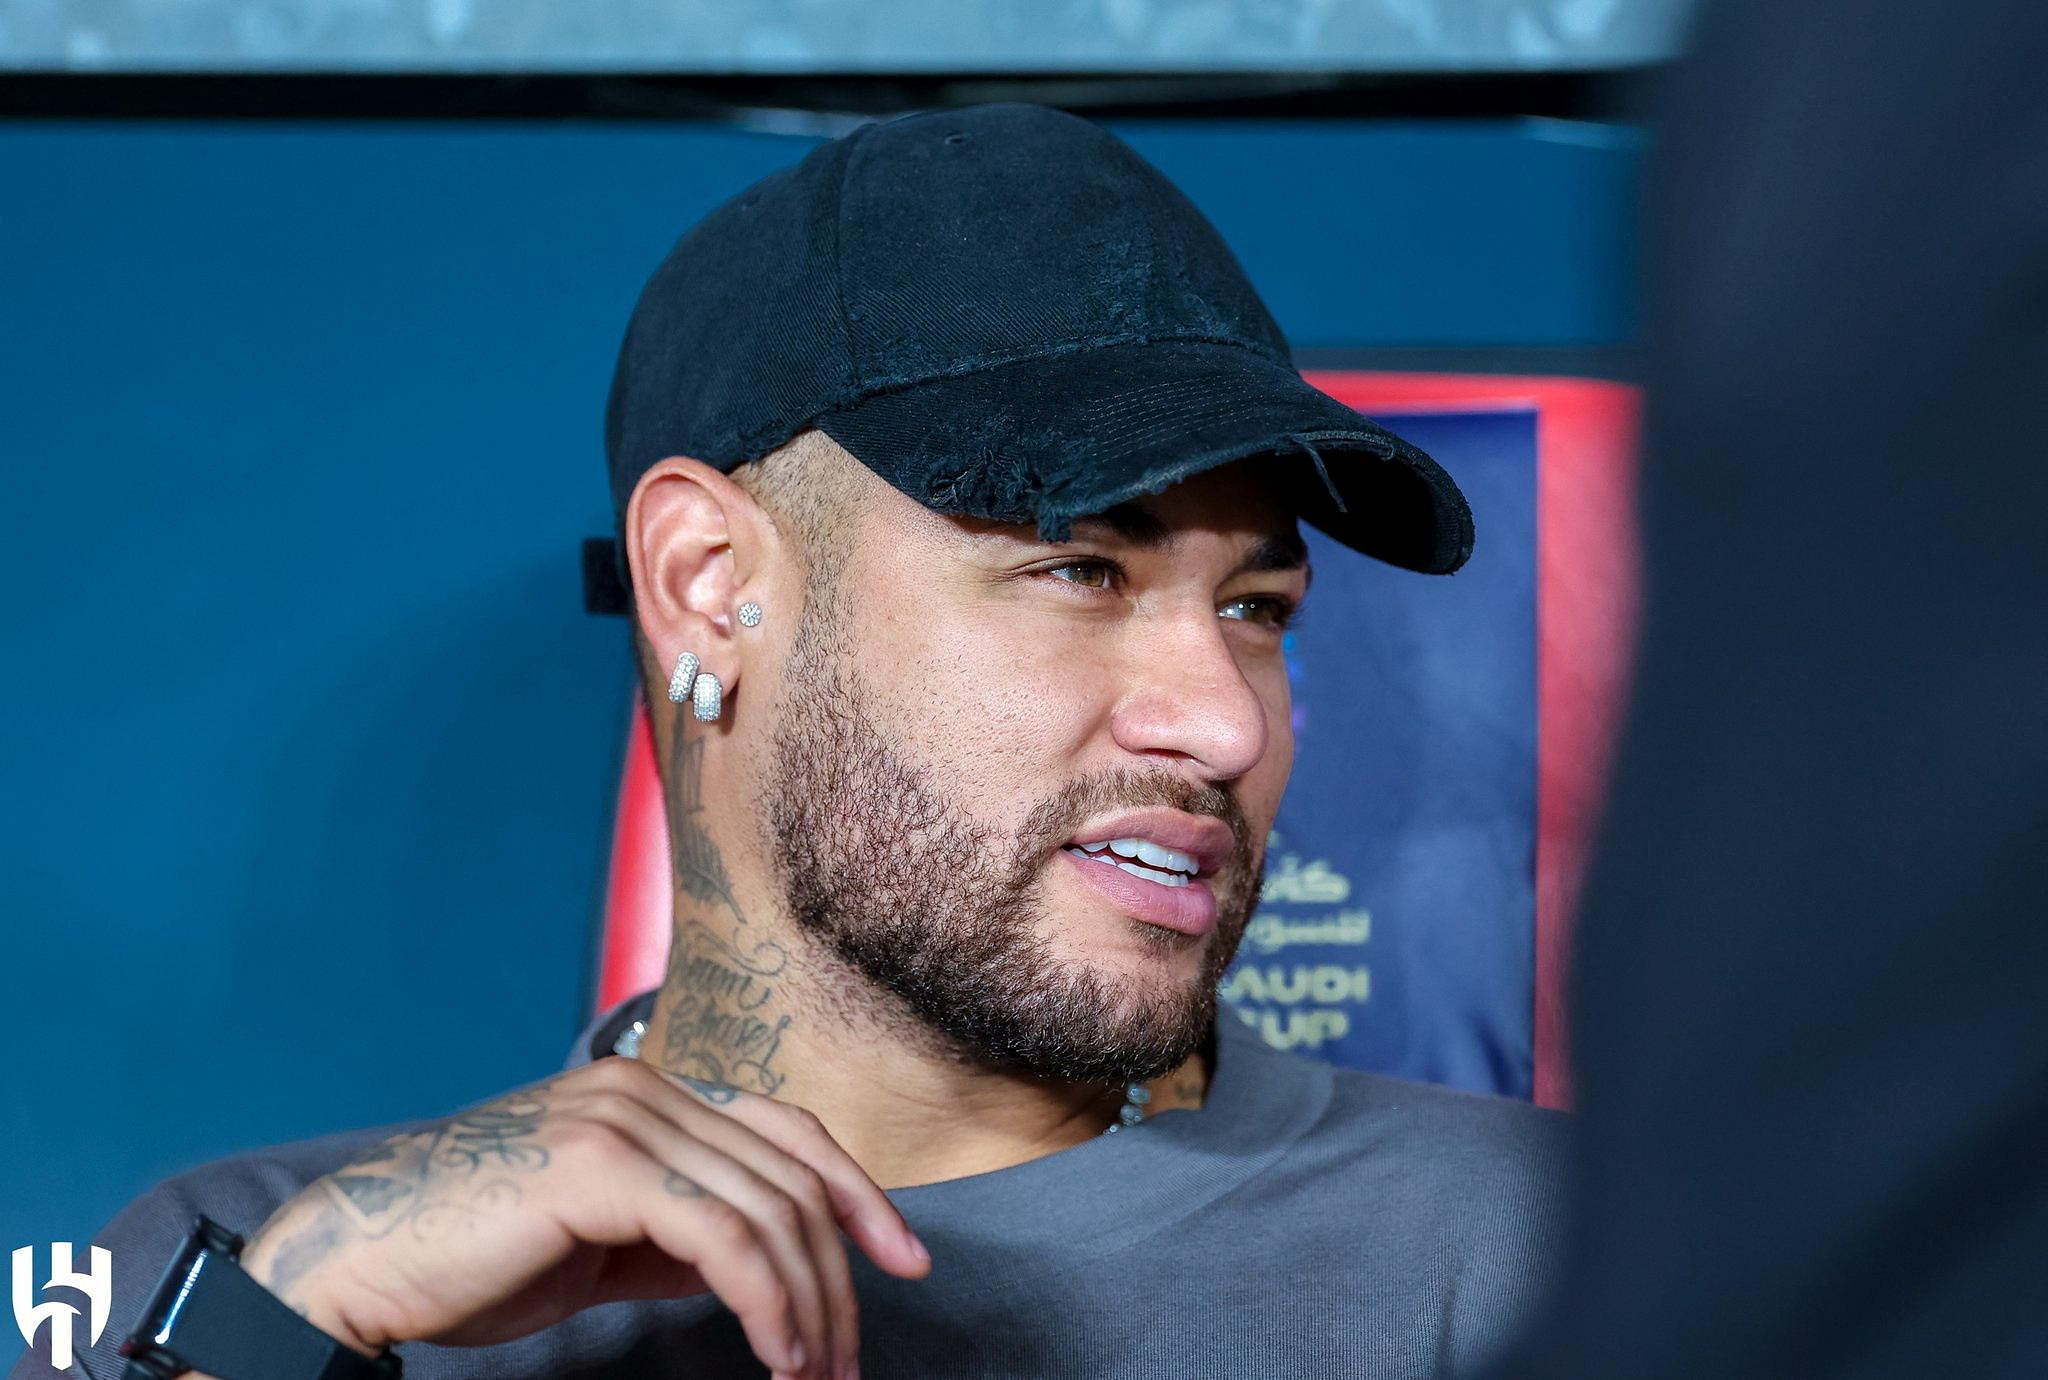 “At the end, he really wasn't nice”: Neymar's bad attitude during his last months at PSG